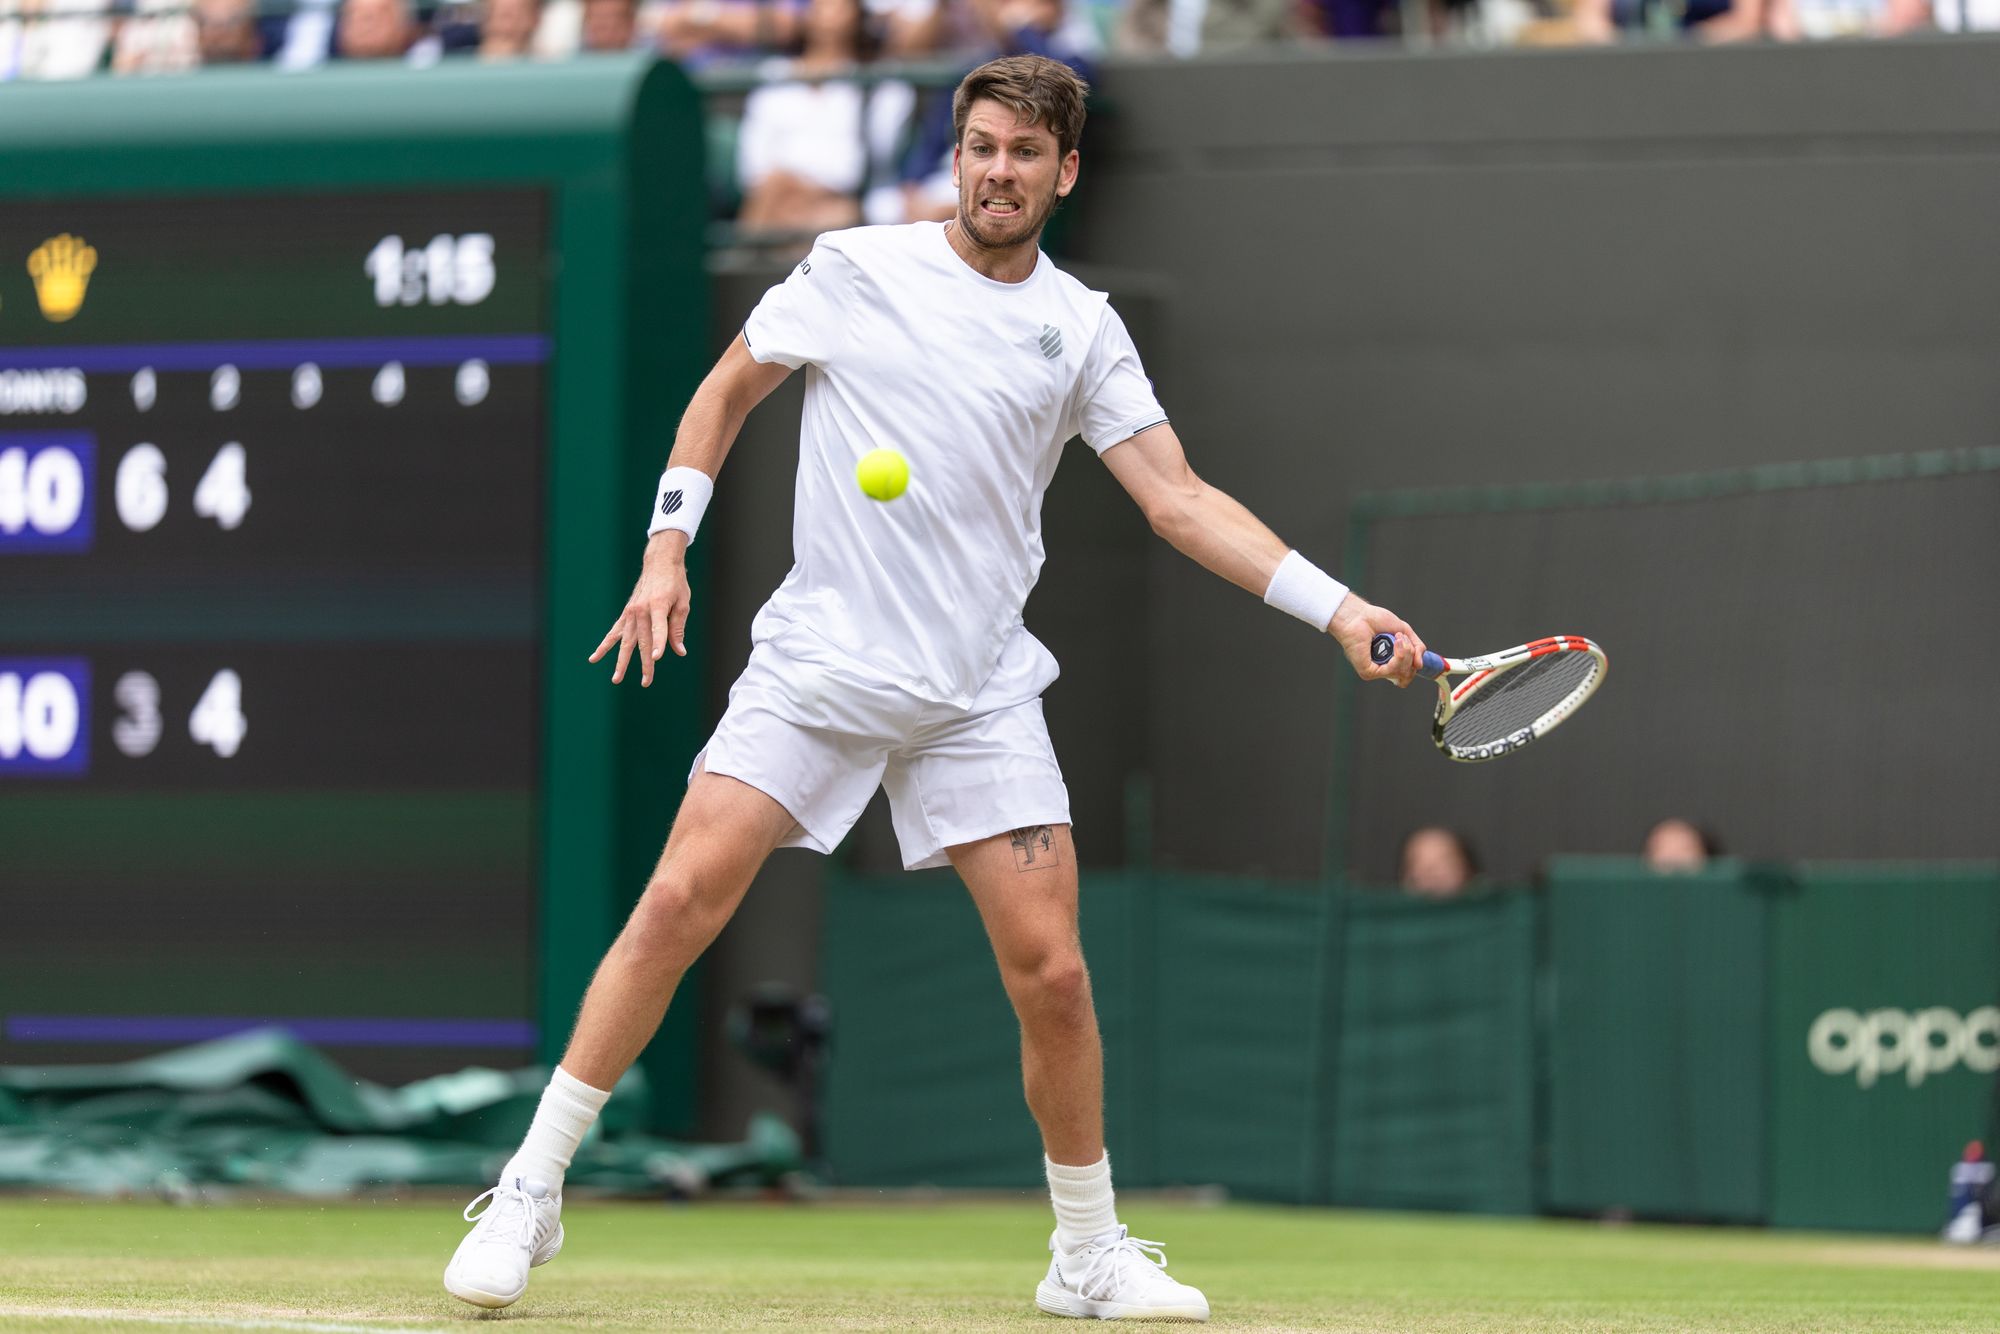 Cameron Norrie vs Novak Djokovic Wimbledon 2022: How and where to watch online for free, 8 July